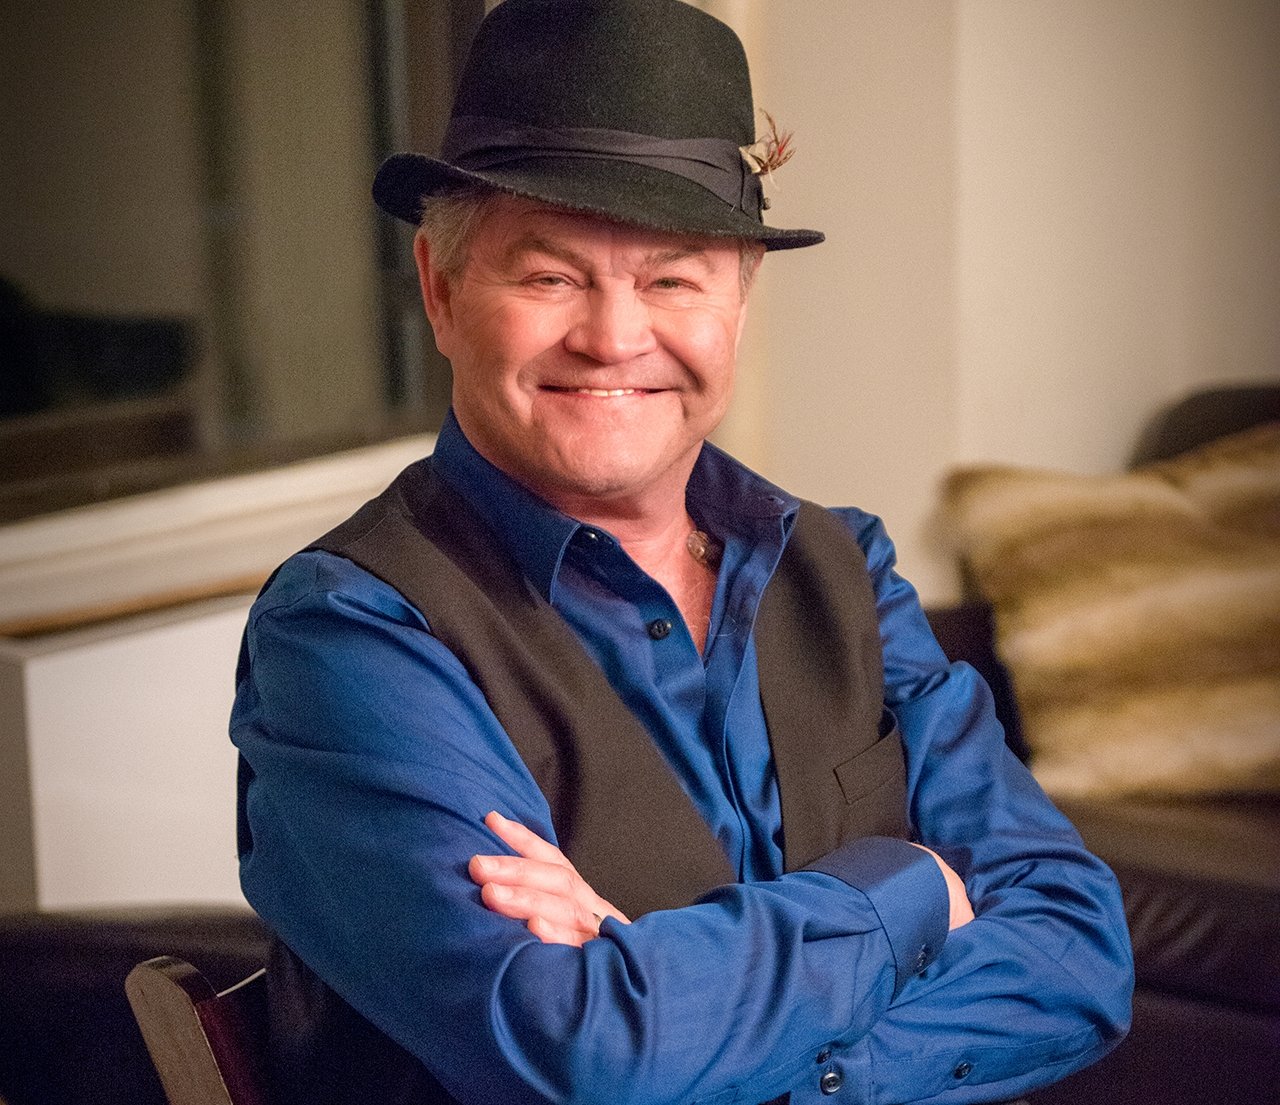 The Monkees' Micky Dolenz wearing a black hat